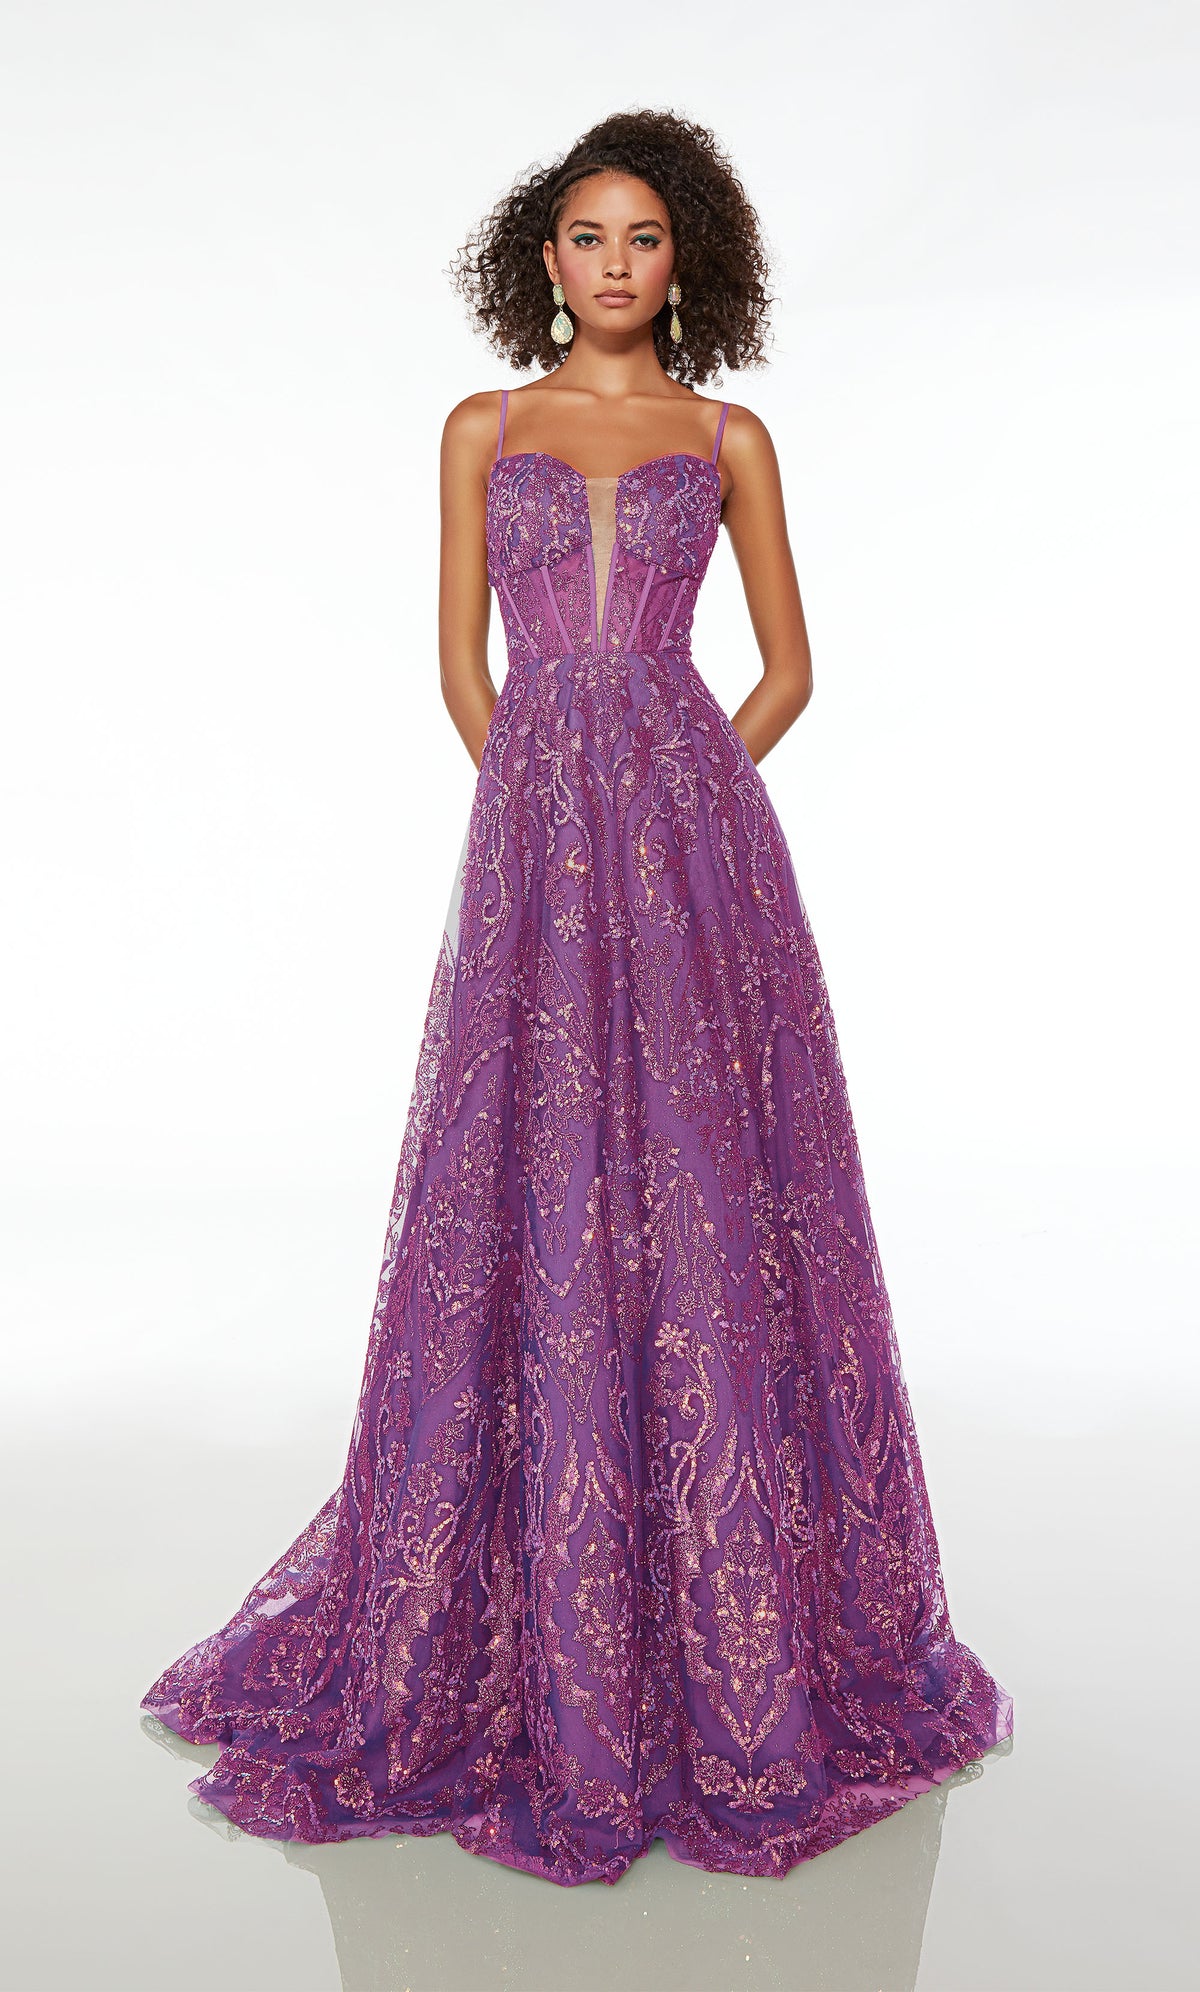 Purple prom dress: plunging neckline, corset top, spaghetti straps, A-line skirt, lace-up back, train, glitter embellishments—unique and captivating.